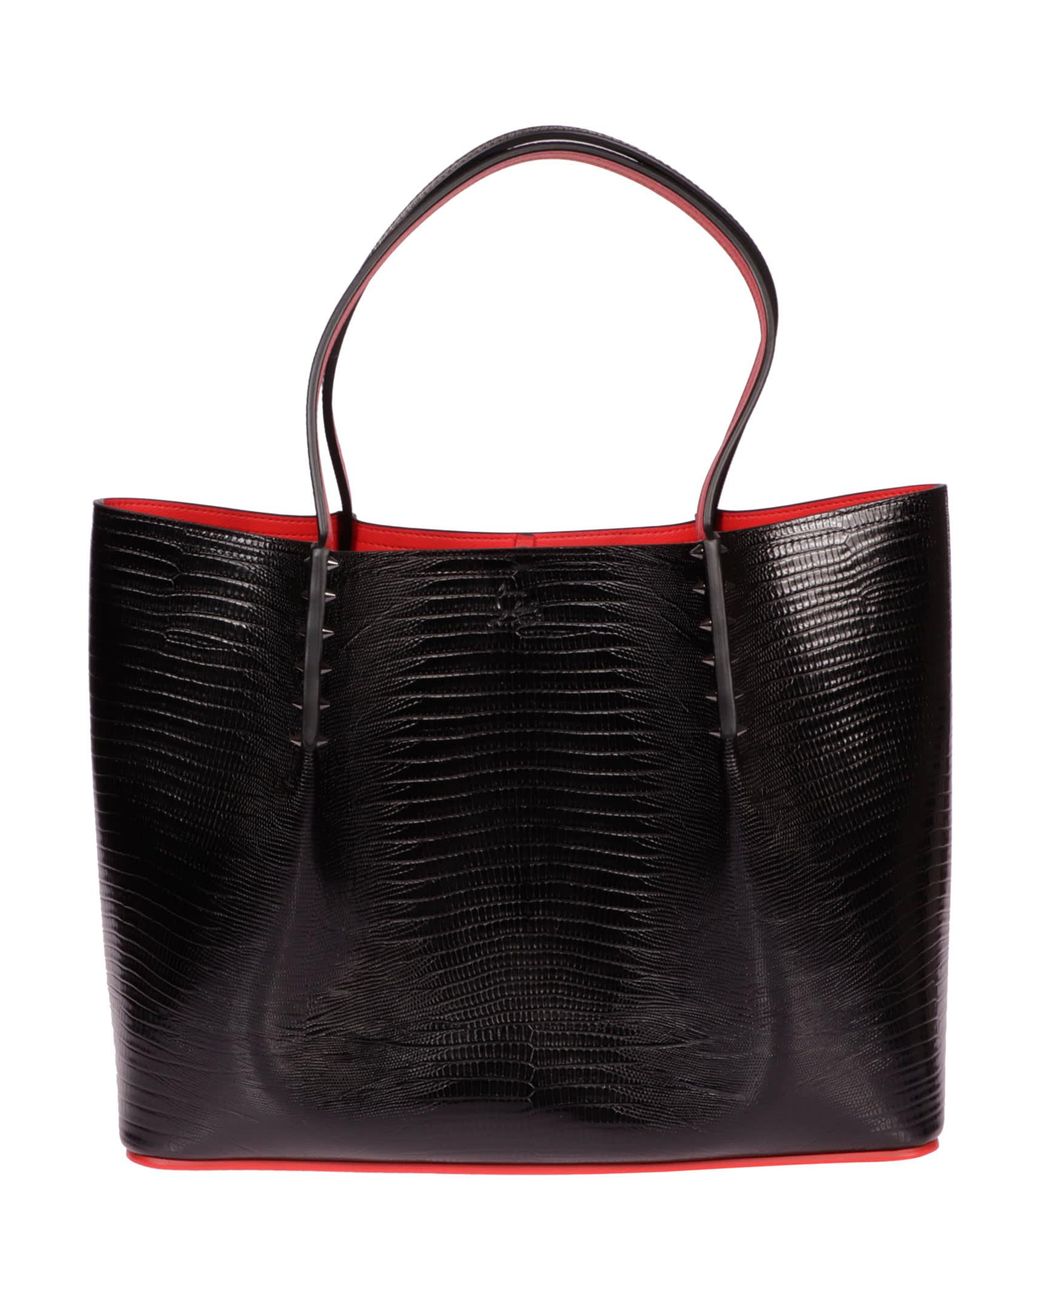 Christian Louboutin Leather Cabarock Spiked Large Tote Bag in Black | Lyst